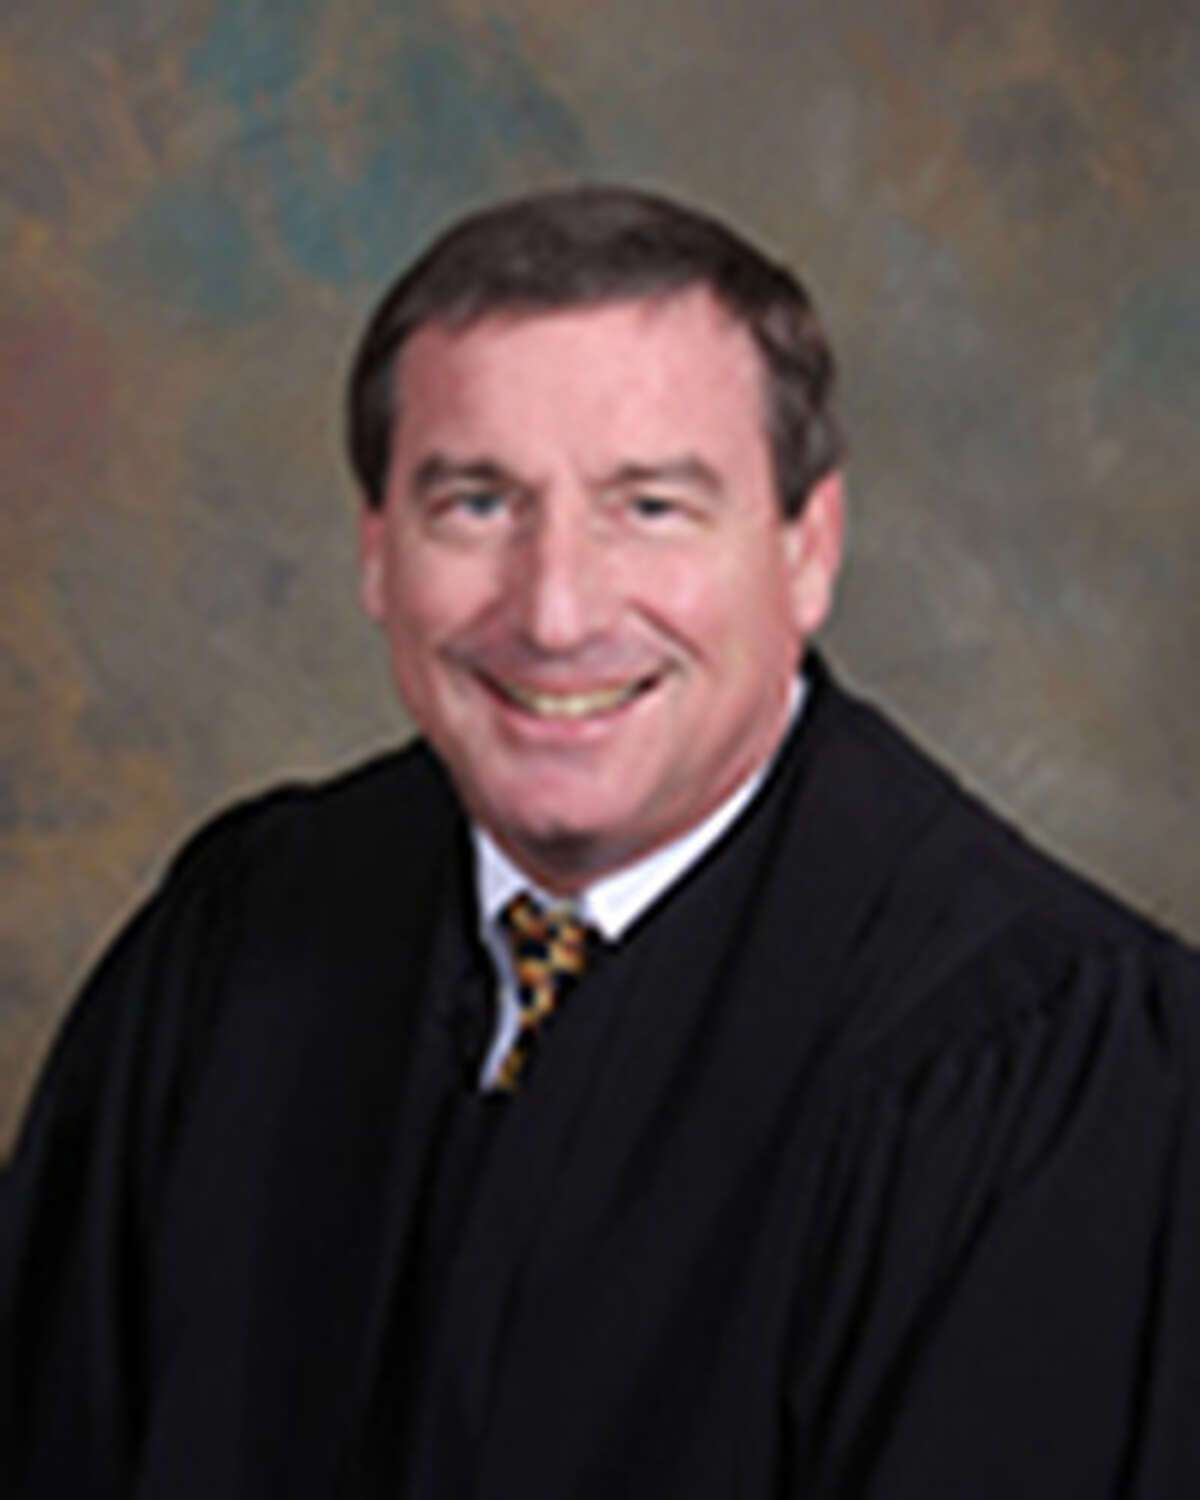 U.S. District Judge Andrew Hanen had said attorneys with the Justice Department misled him.